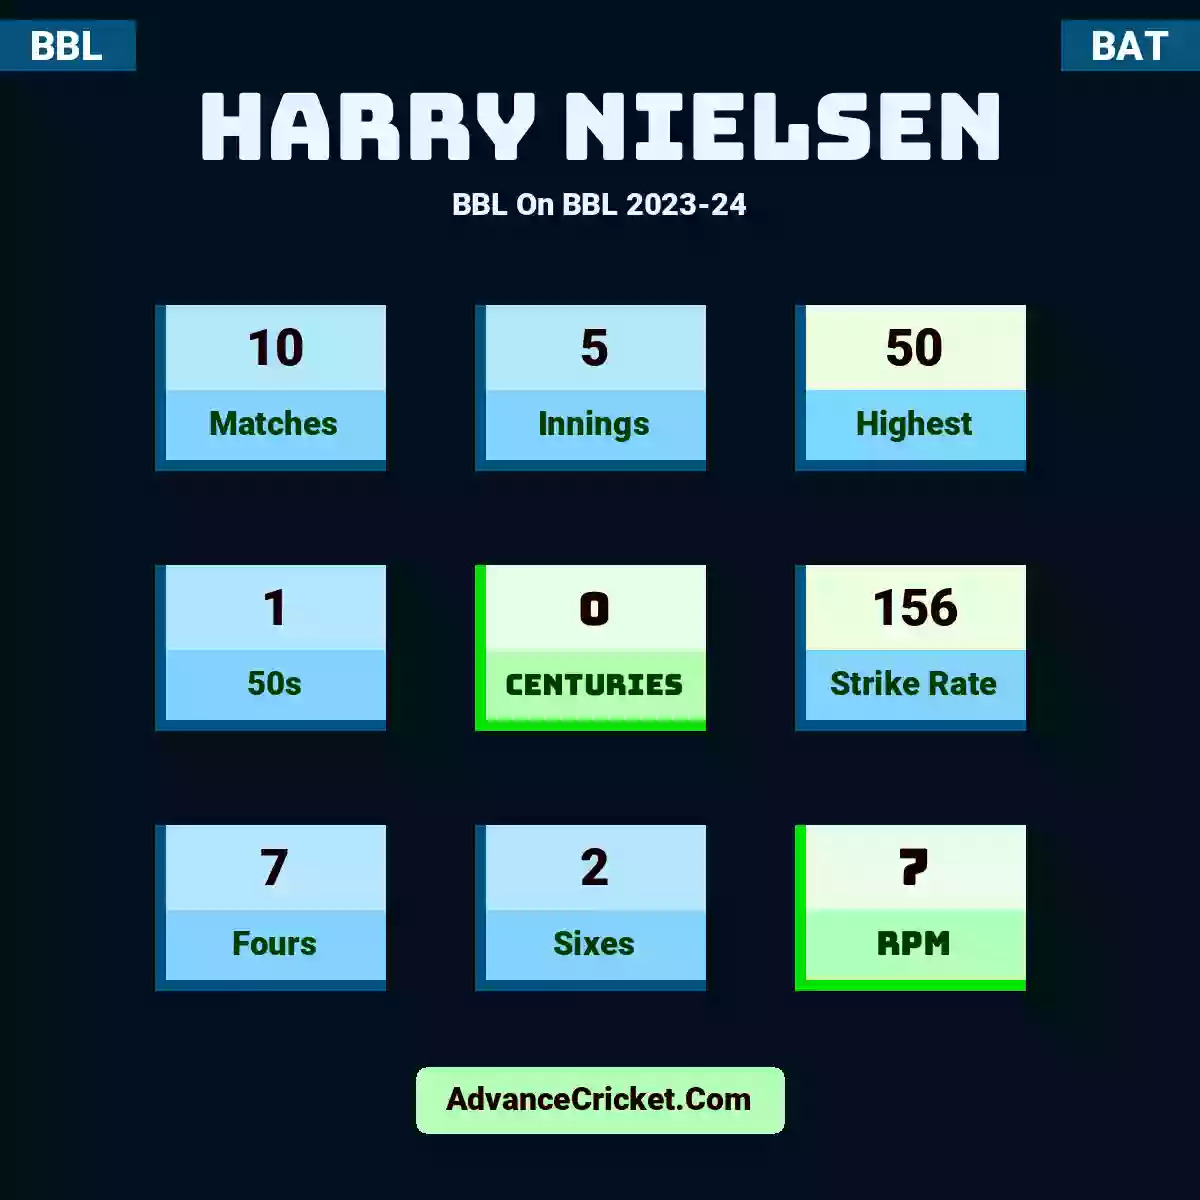 Harry Nielsen BBL  On BBL 2023-24, Harry Nielsen played 10 matches, scored 50 runs as highest, 1 half-centuries, and 0 centuries, with a strike rate of 156. H.Nielsen hit 7 fours and 2 sixes, with an RPM of 7.